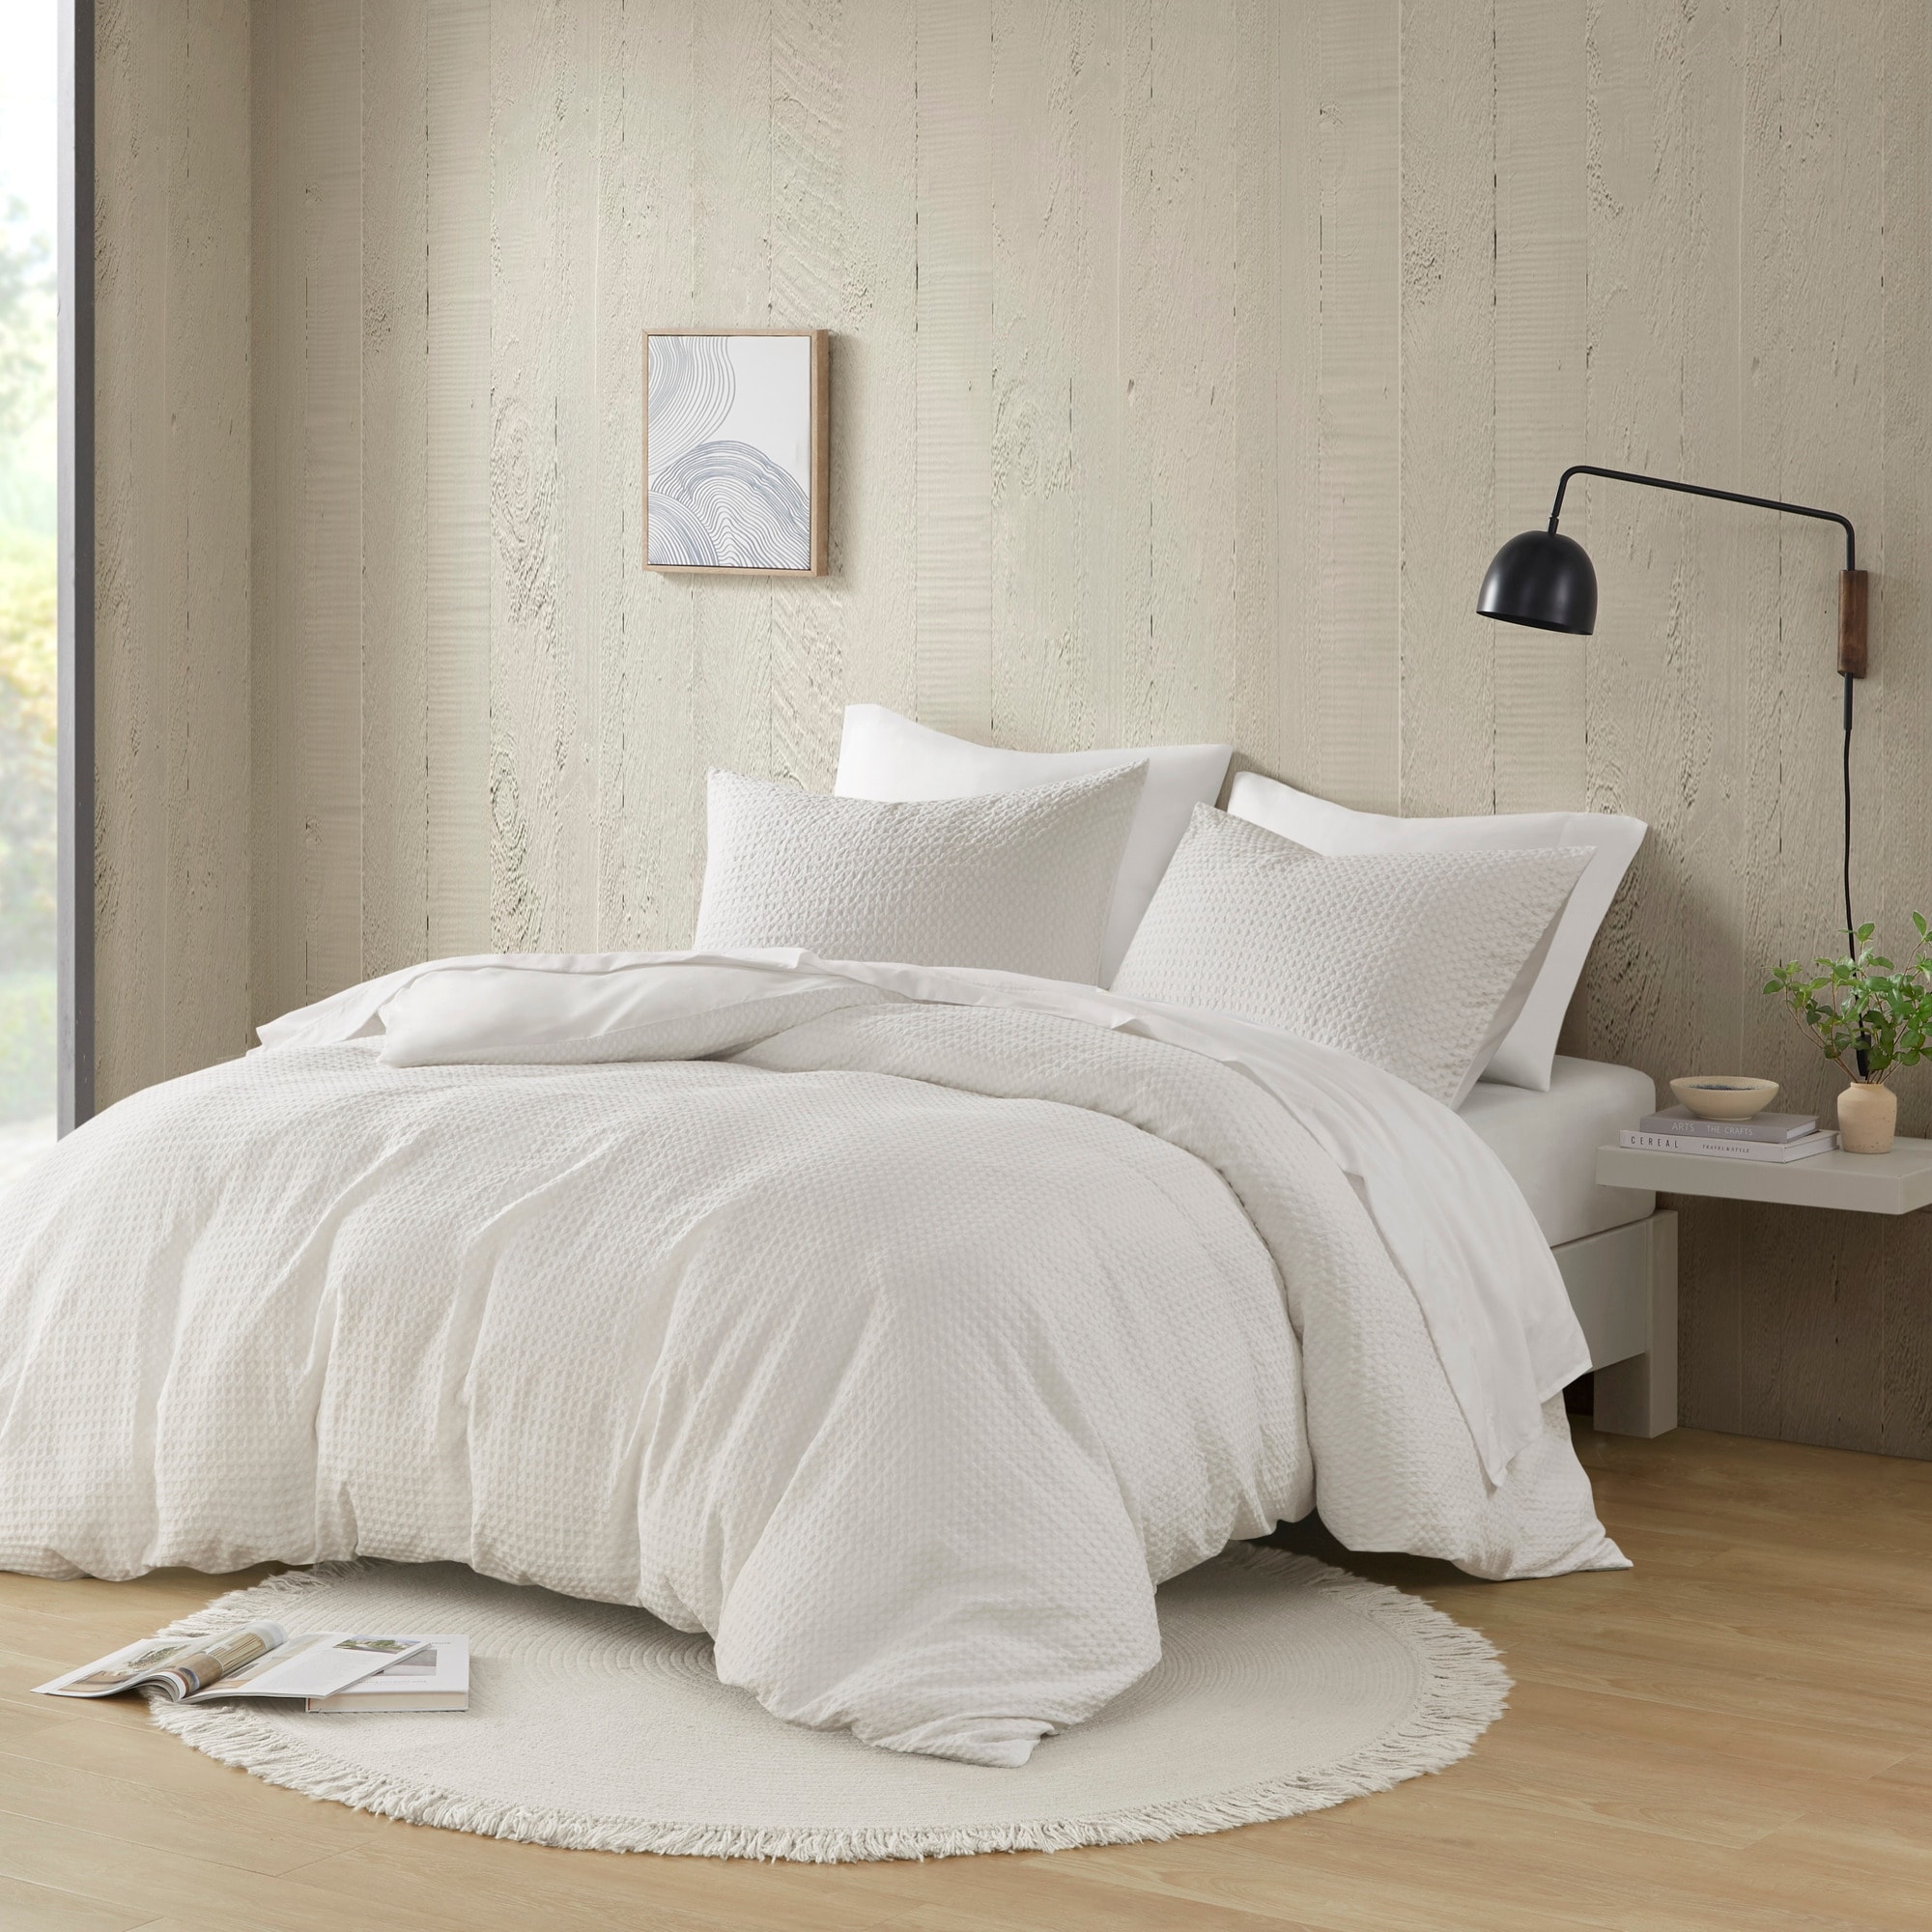 Textured Duvet Covers and Sets - Bed Bath & Beyond